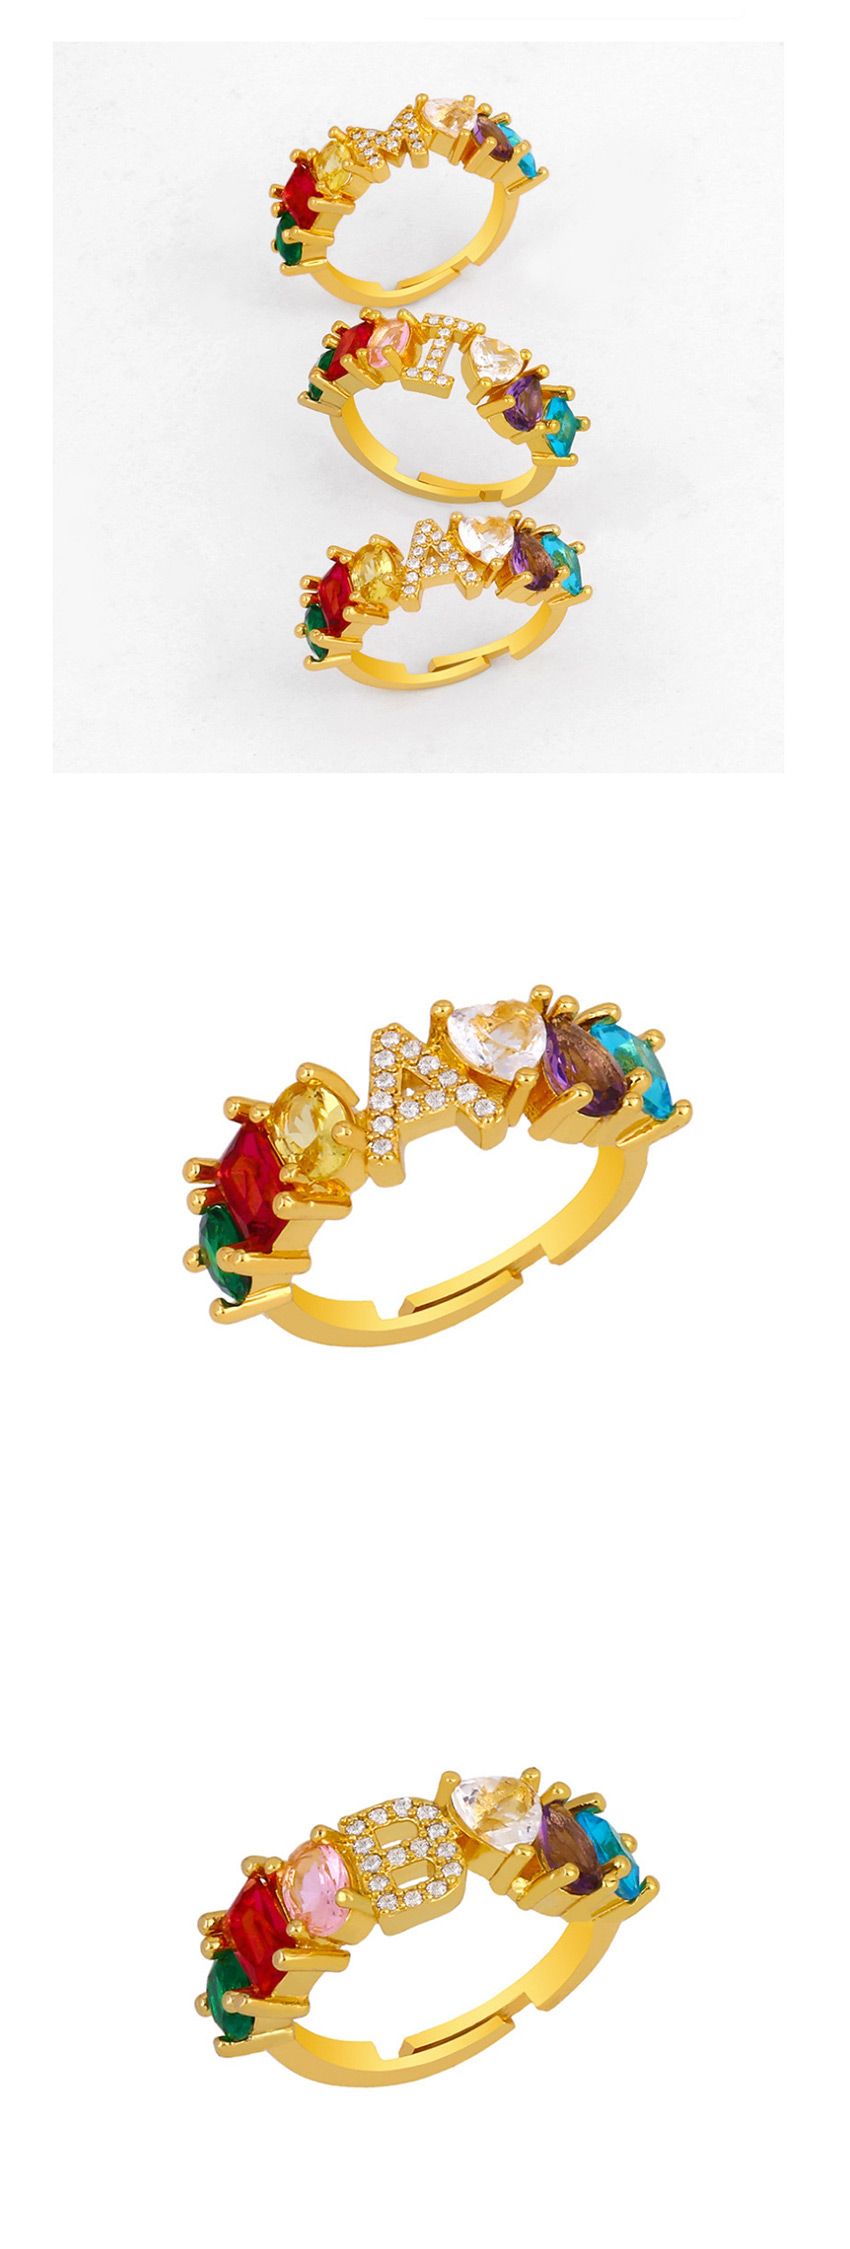 Fashion P Gold Heart-shaped Adjustable Ring With Colorful Diamond Letters,Rings